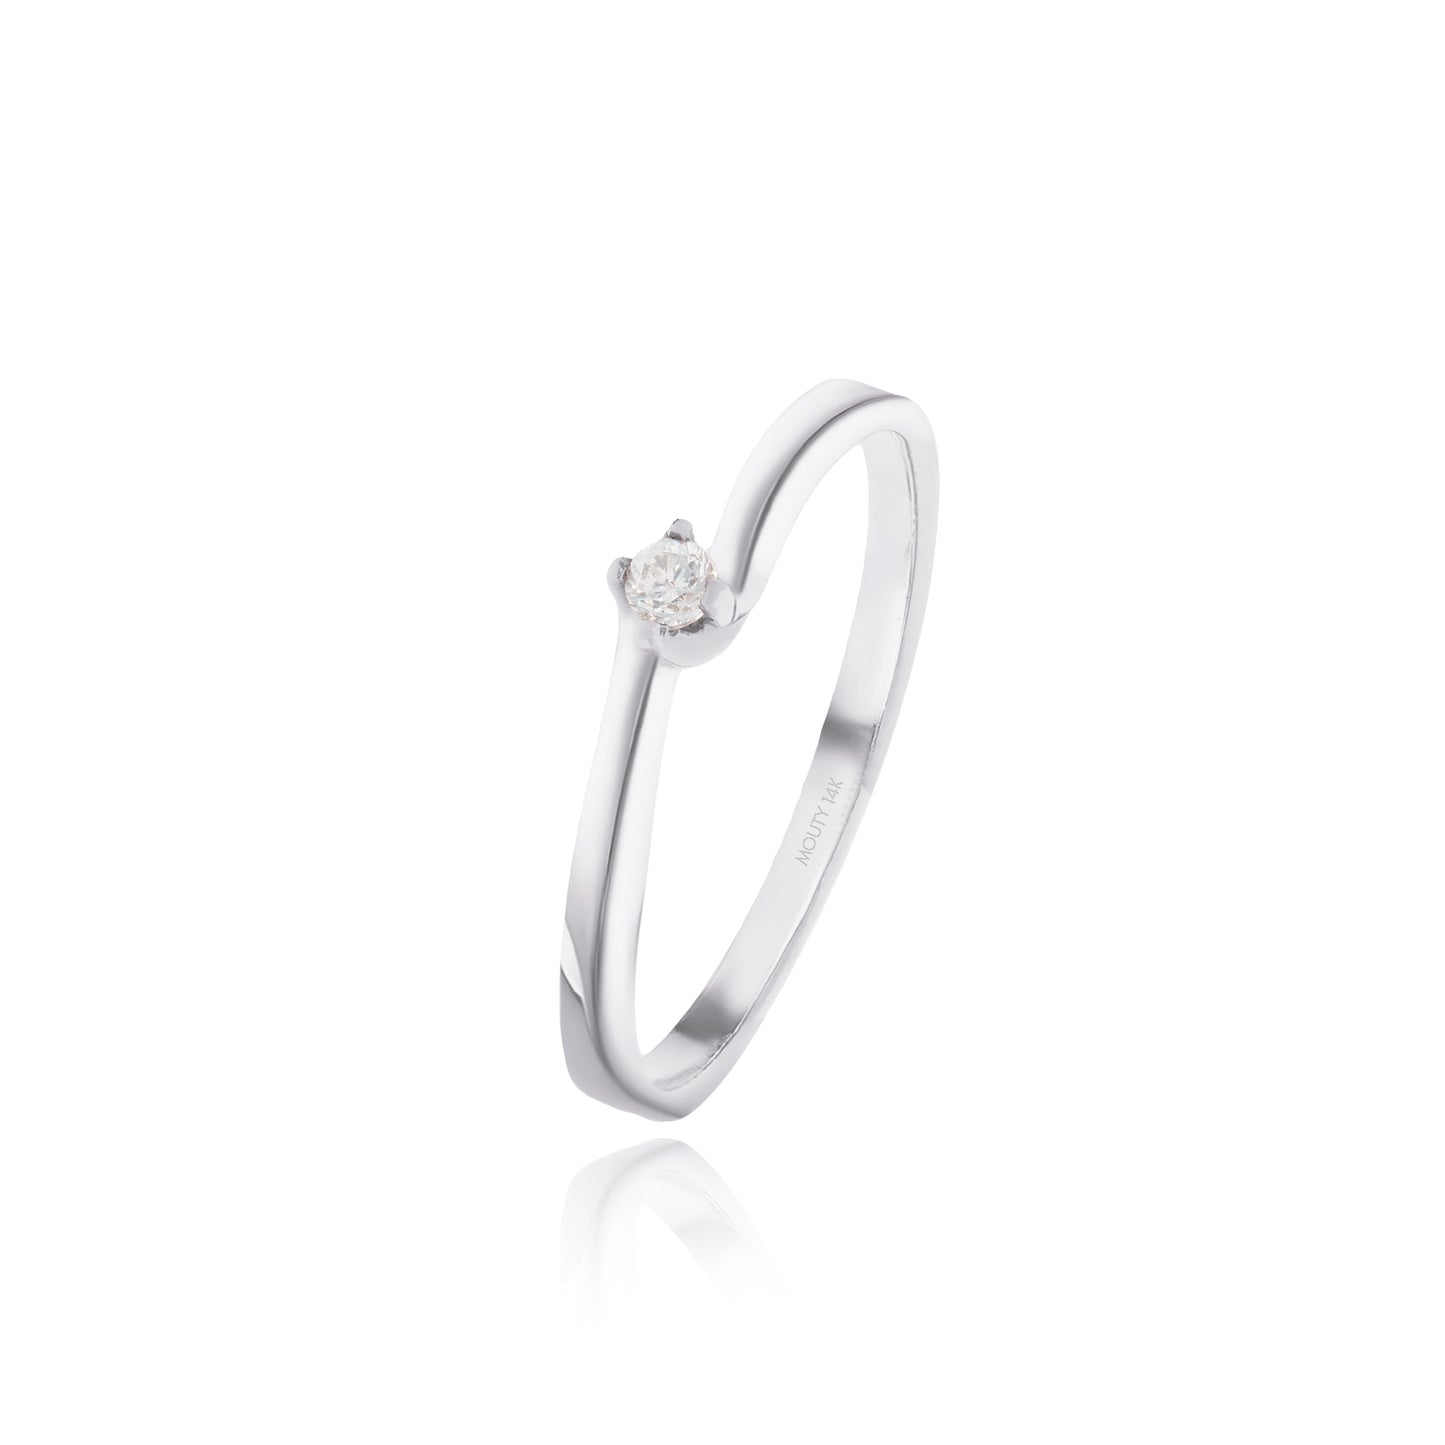 Olivia ring in 18k white gold with zircons